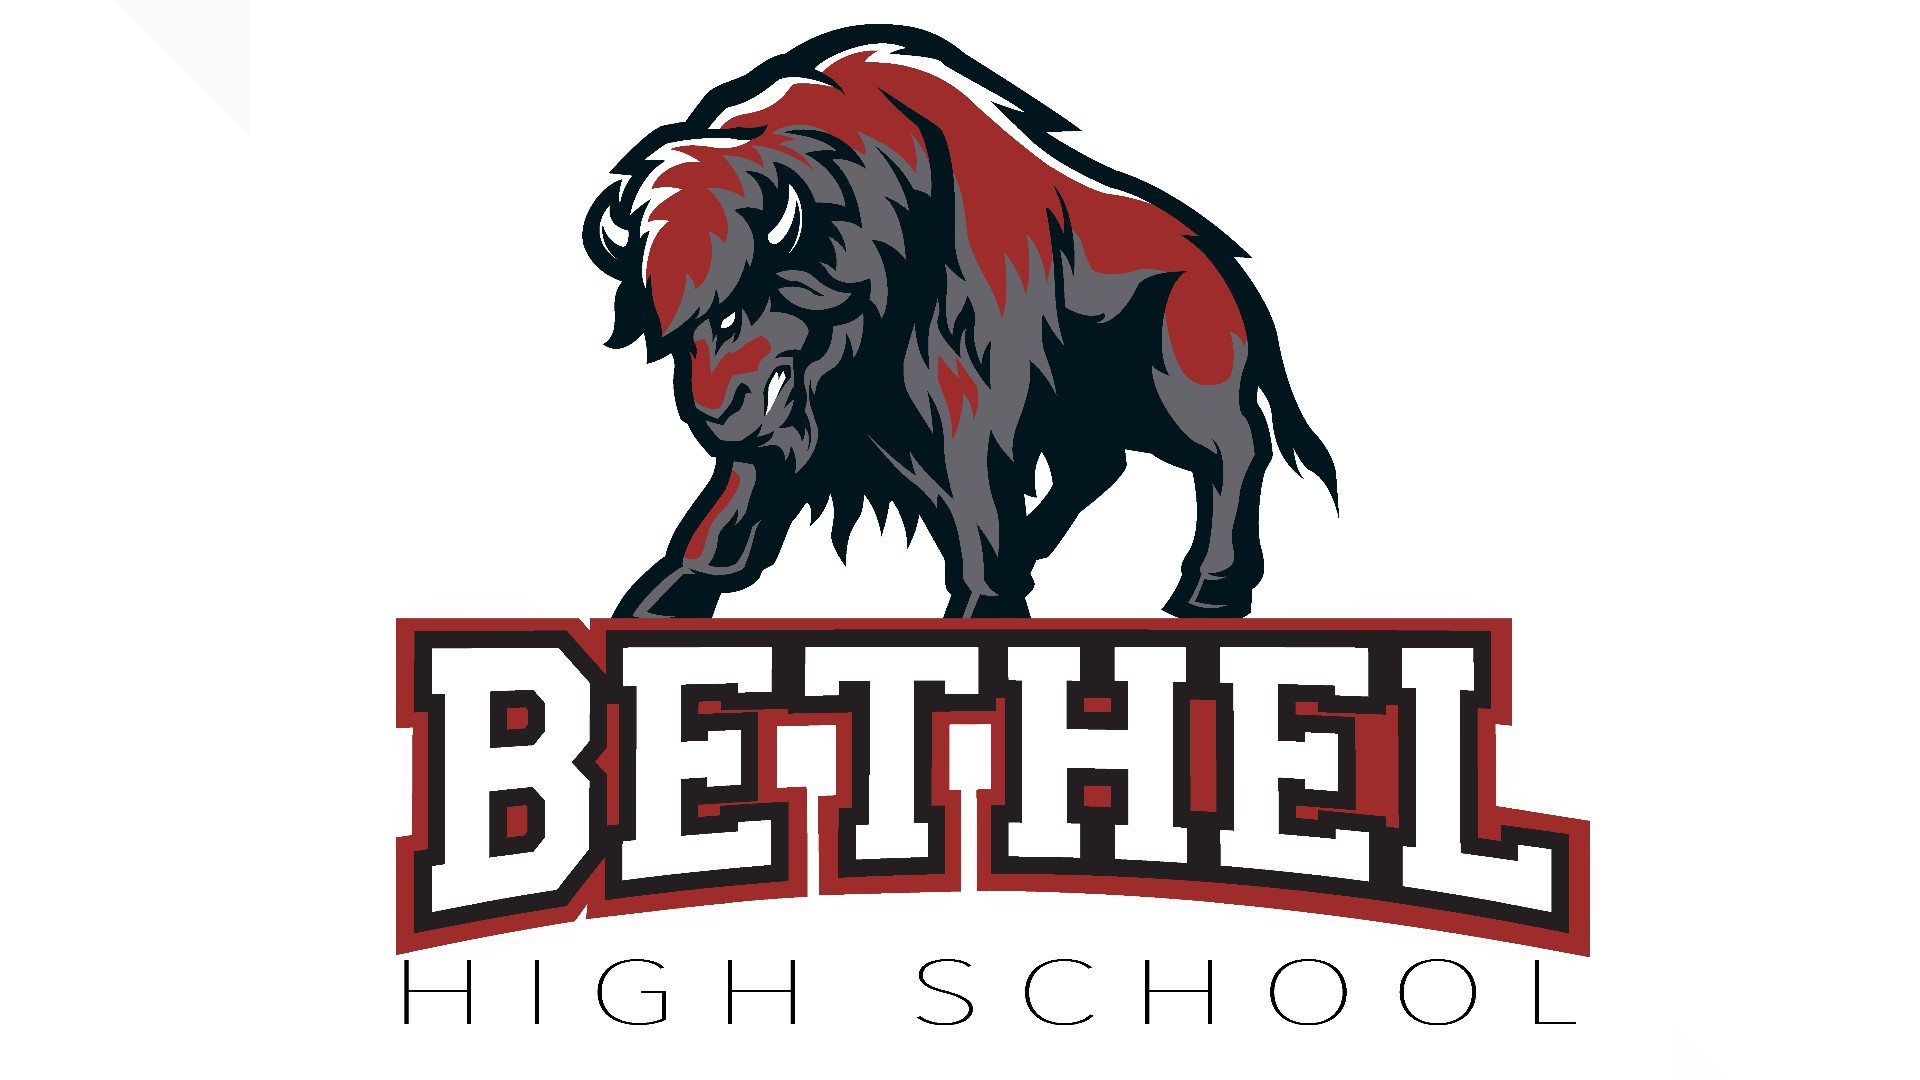 A state ban on Native American team names prompted Bethel High School to retire its Braves mascot.